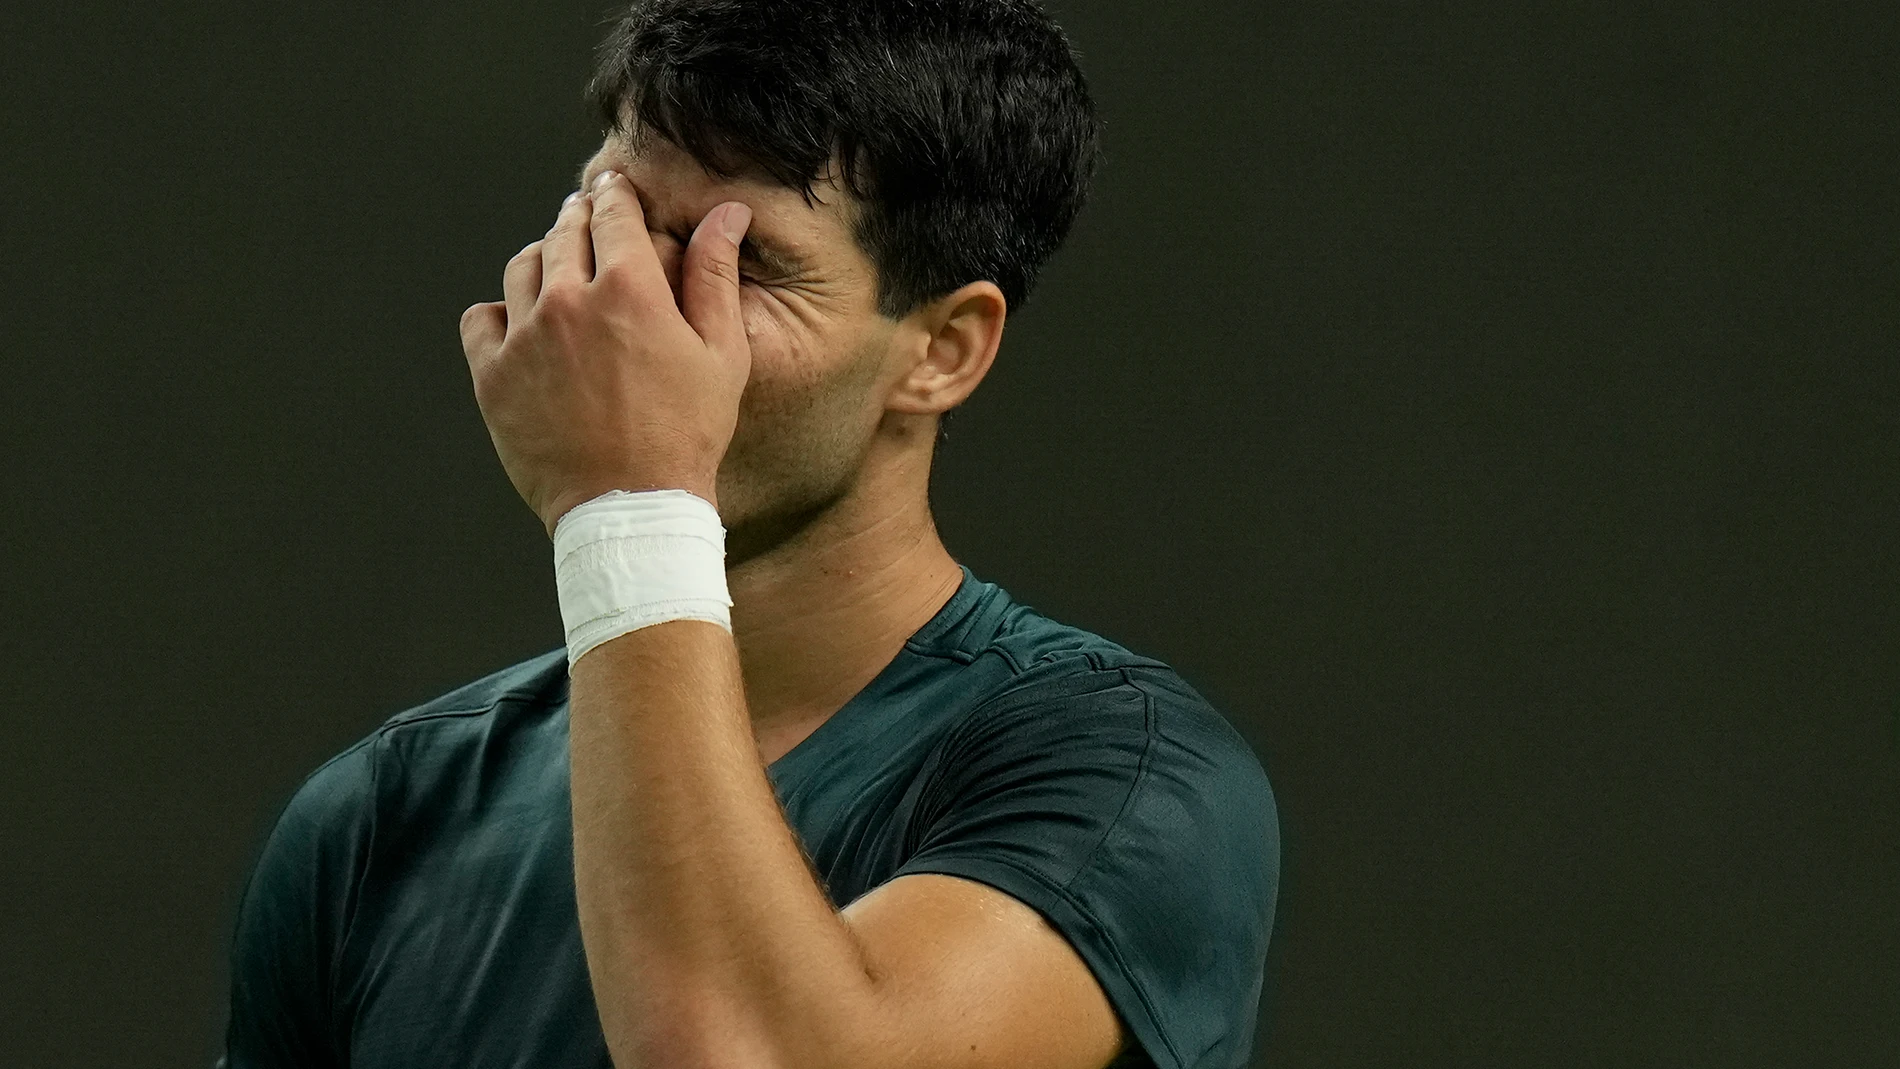 Carlos Alcaraz of Spain reacts after losing a point to Grigor Dimitrov of Bulgaria in the 4th round of the men's singles match in the Shanghai Masters tennis tournament at Qizhong Forest Sports City Tennis Center in Shanghai, China, Wednesday, Oct. 11, 2023. (AP Photo/Andy Wong)